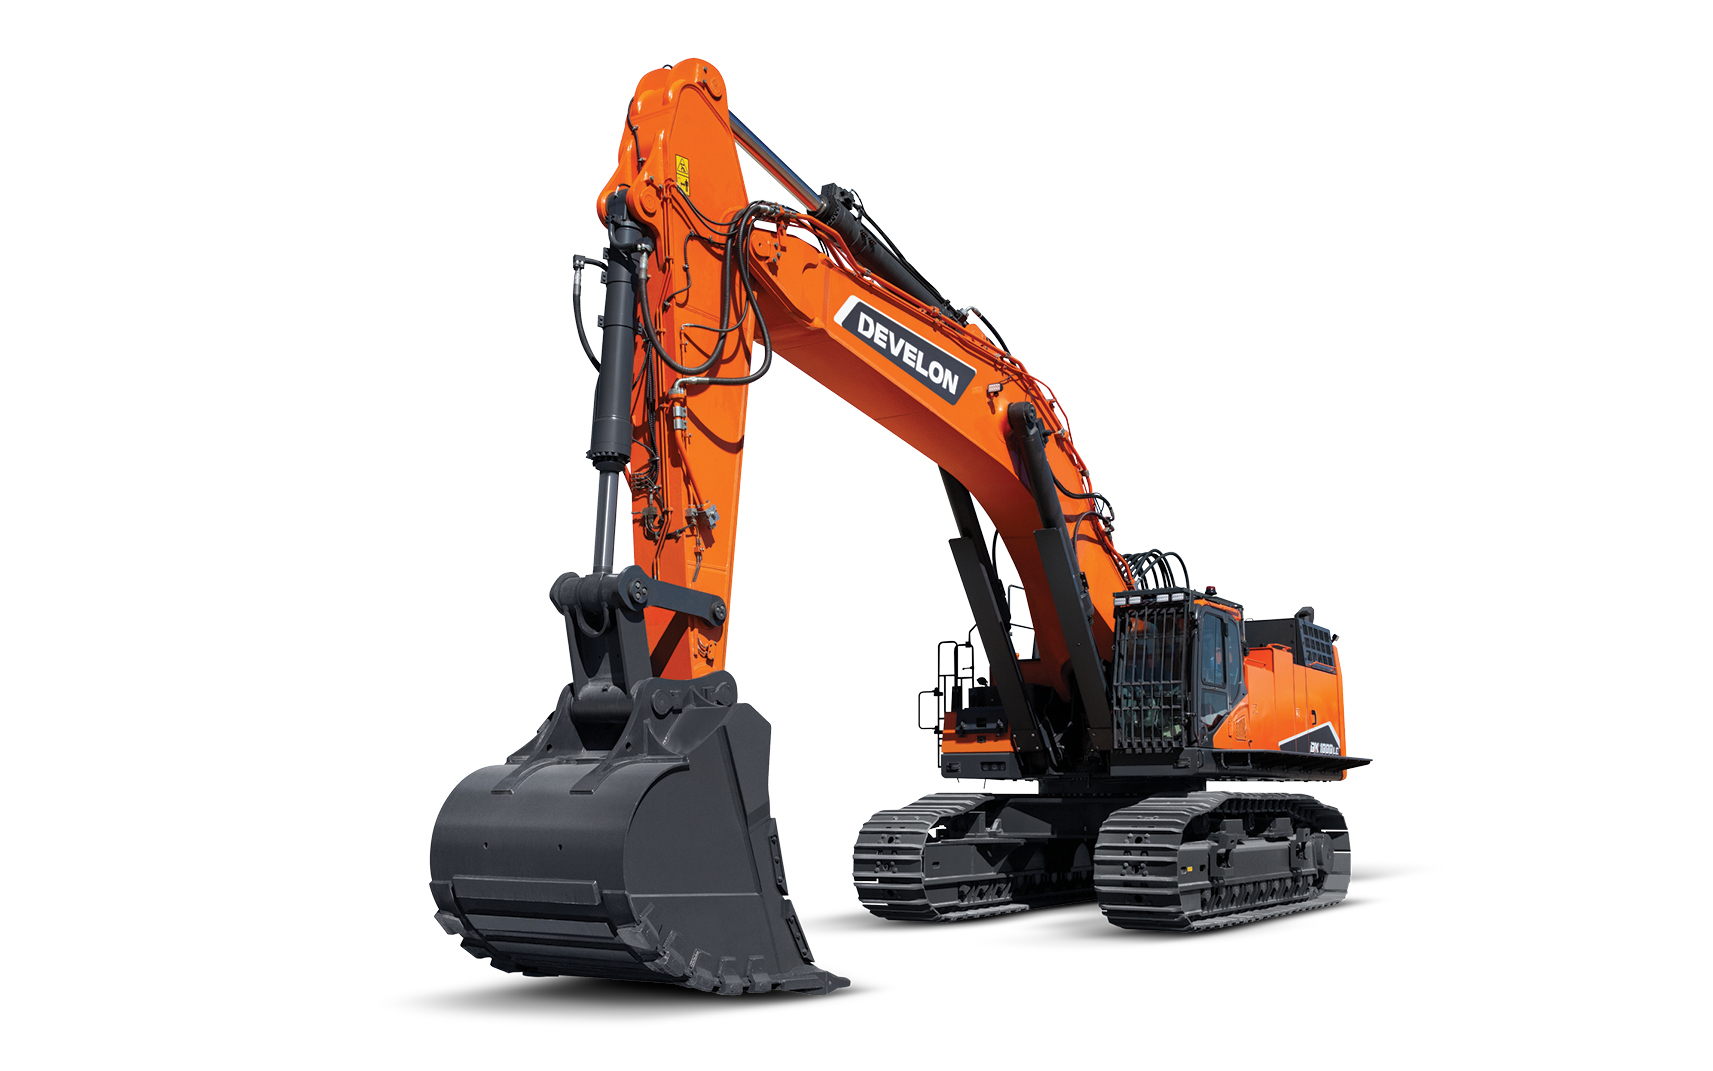 A DX1000LC-7 crawler excavator paired with a bucket attachment.